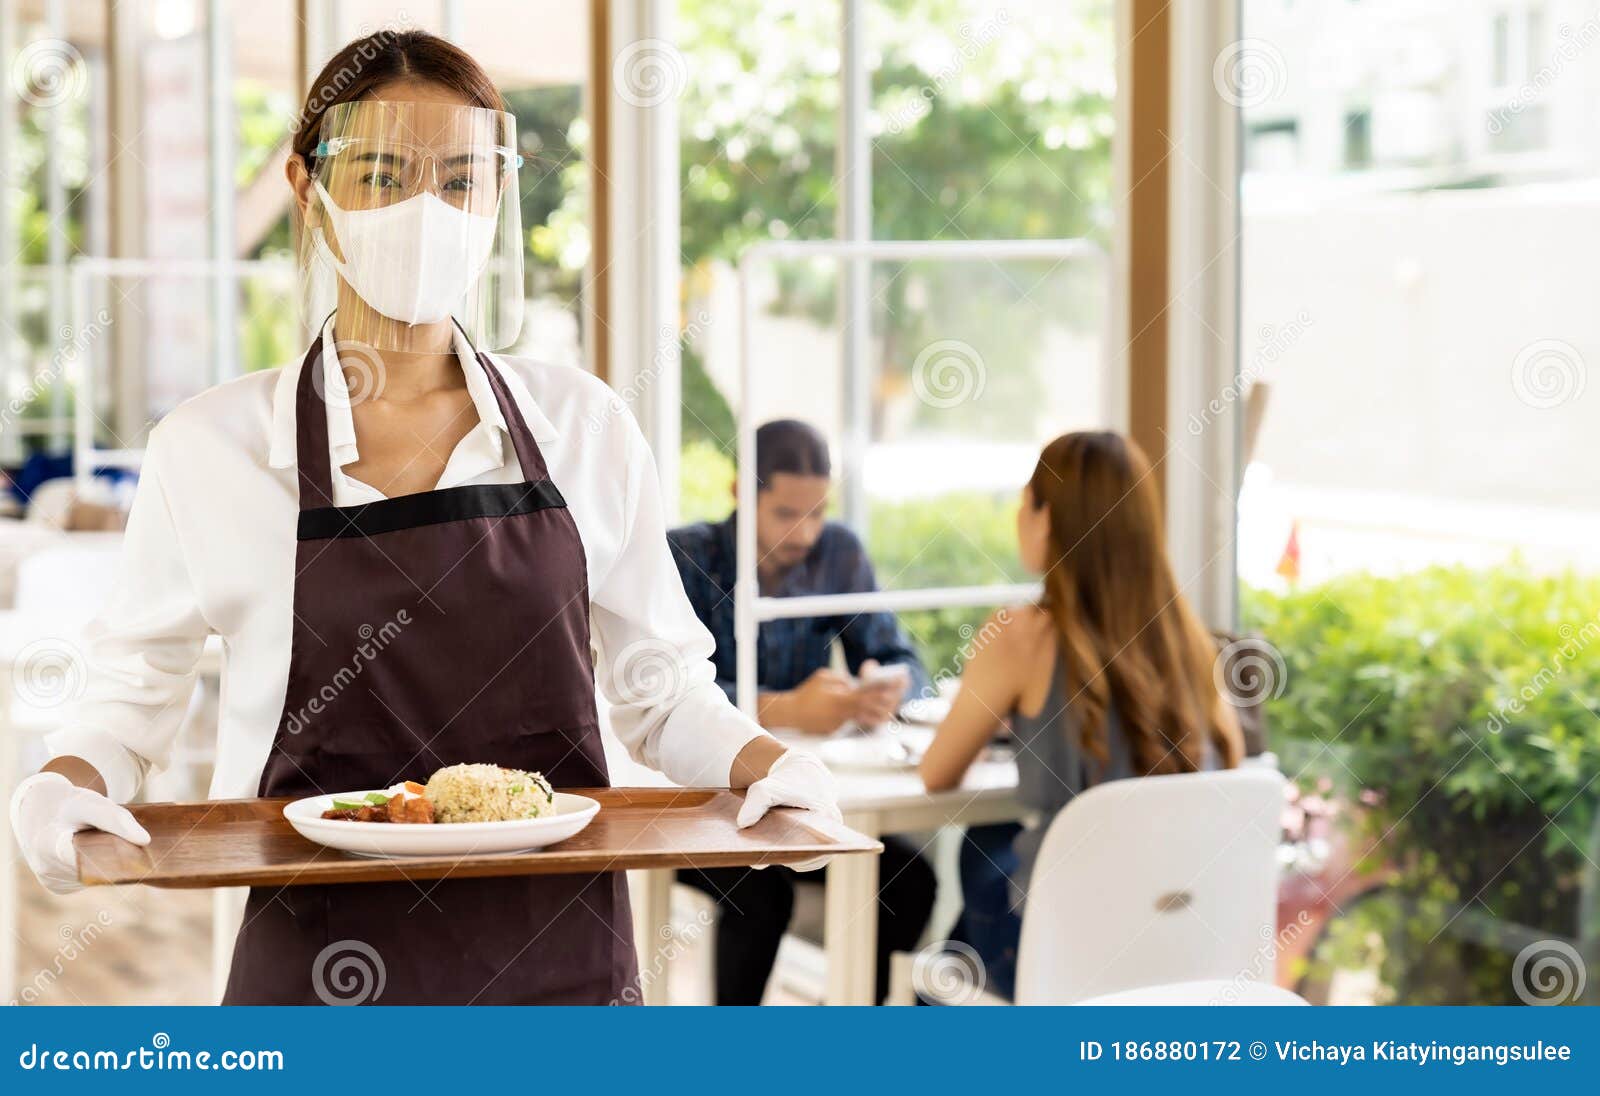 Asian Waitress Talking With Client In Restaurant Stock Image 22629091